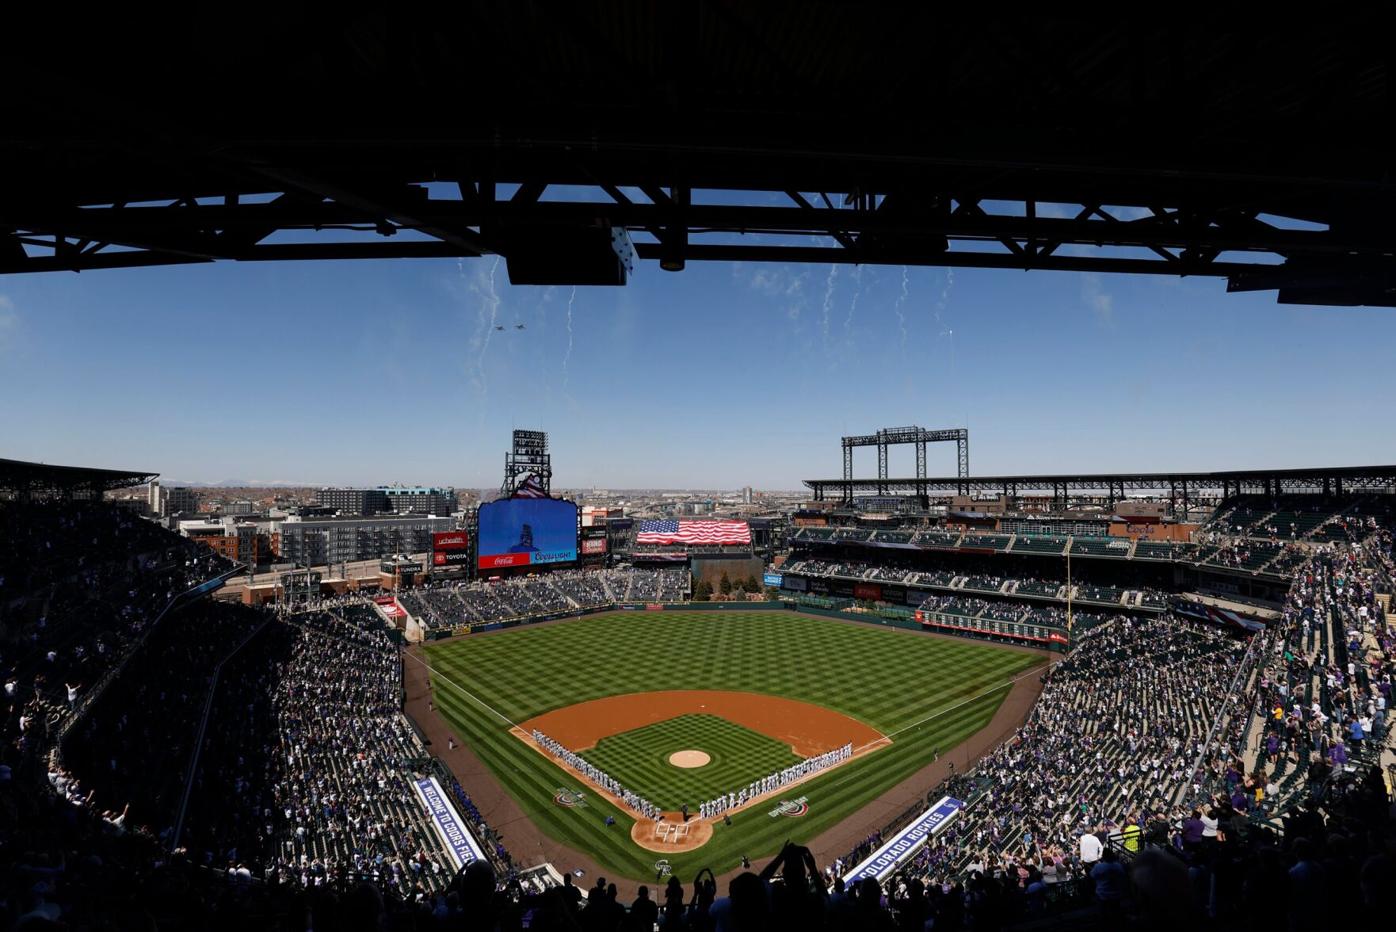 Colorado Rockies: Some things may change, but Coors Field won't